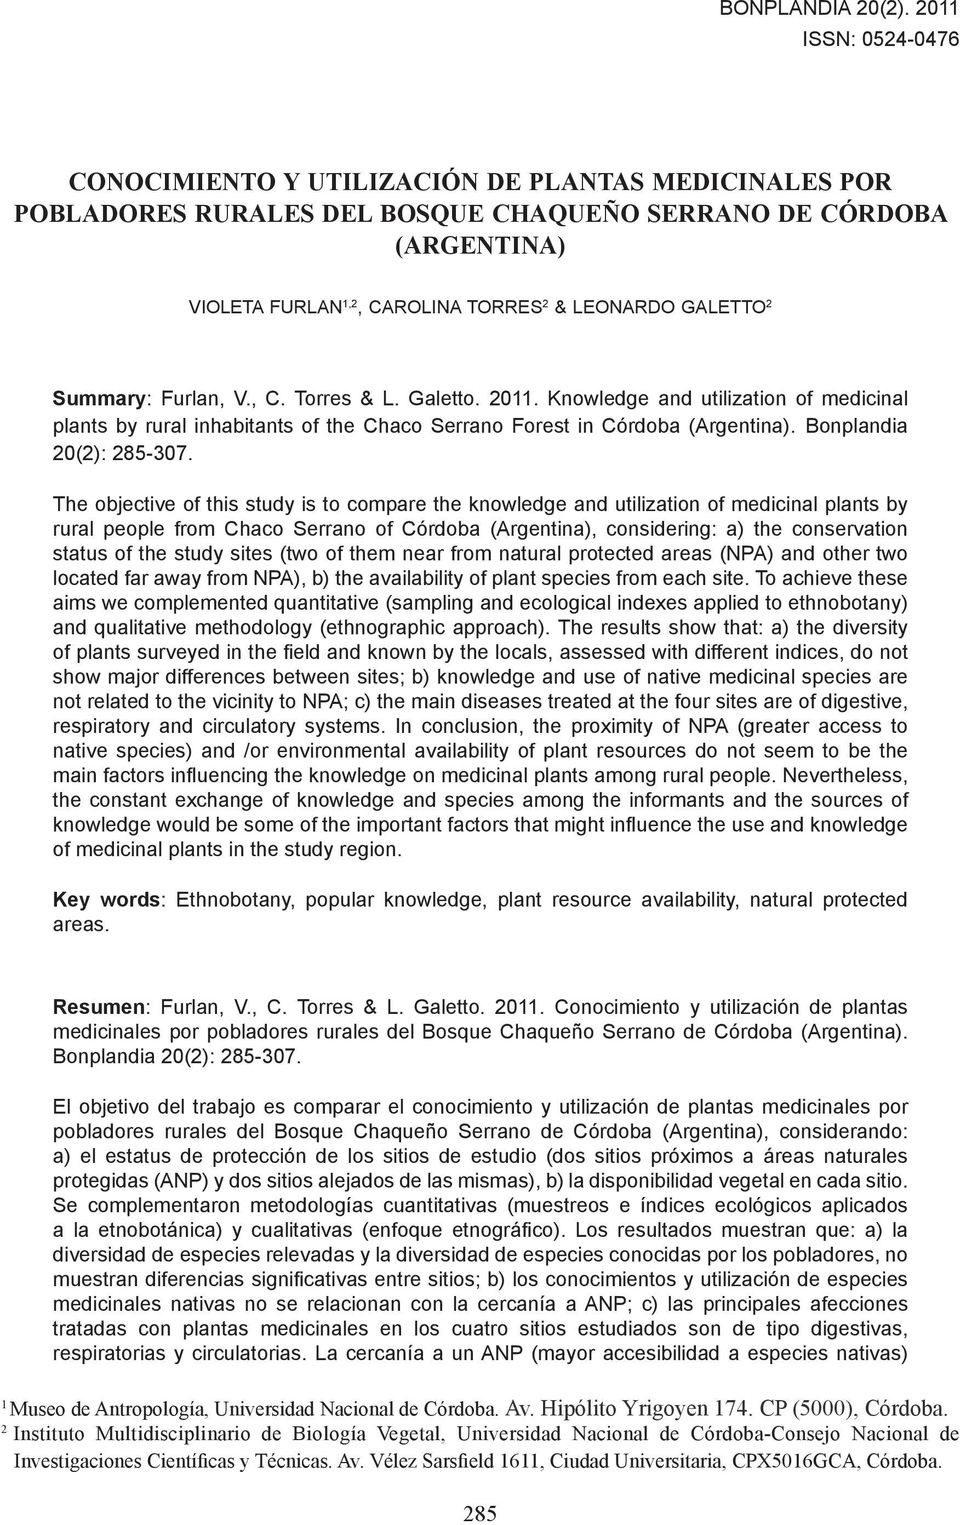 galetto 2 Summary: Furlan, V., C. Torres & L. Galetto. 2011. Knowledge and utilization of medicinal plants by rural inhabitants of the Chaco Serrano Forest in Córdoba (Argentina).